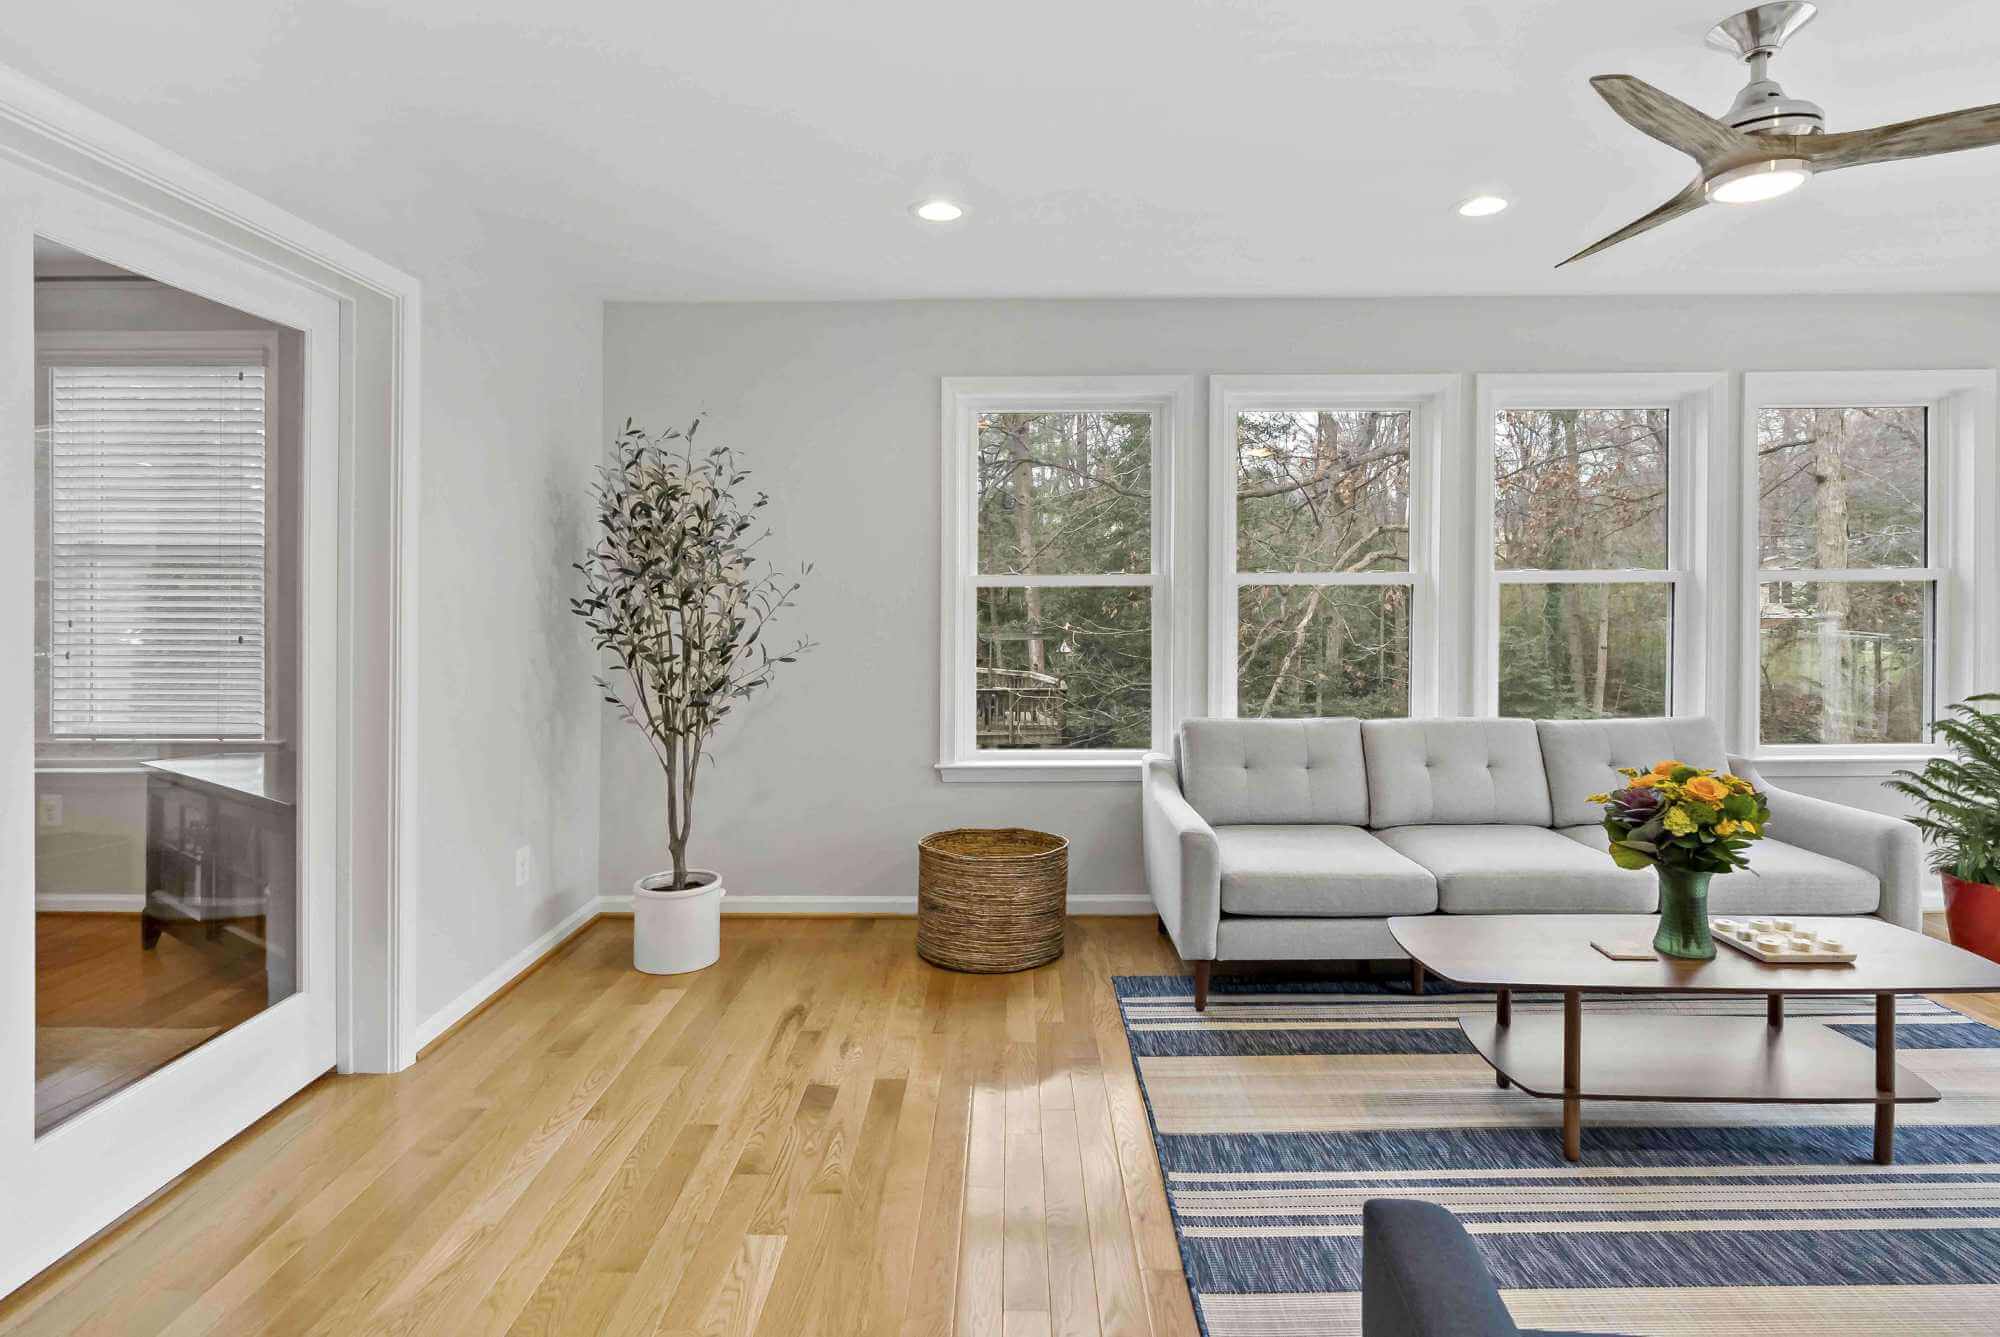 Hard wood floors in living room with large windows